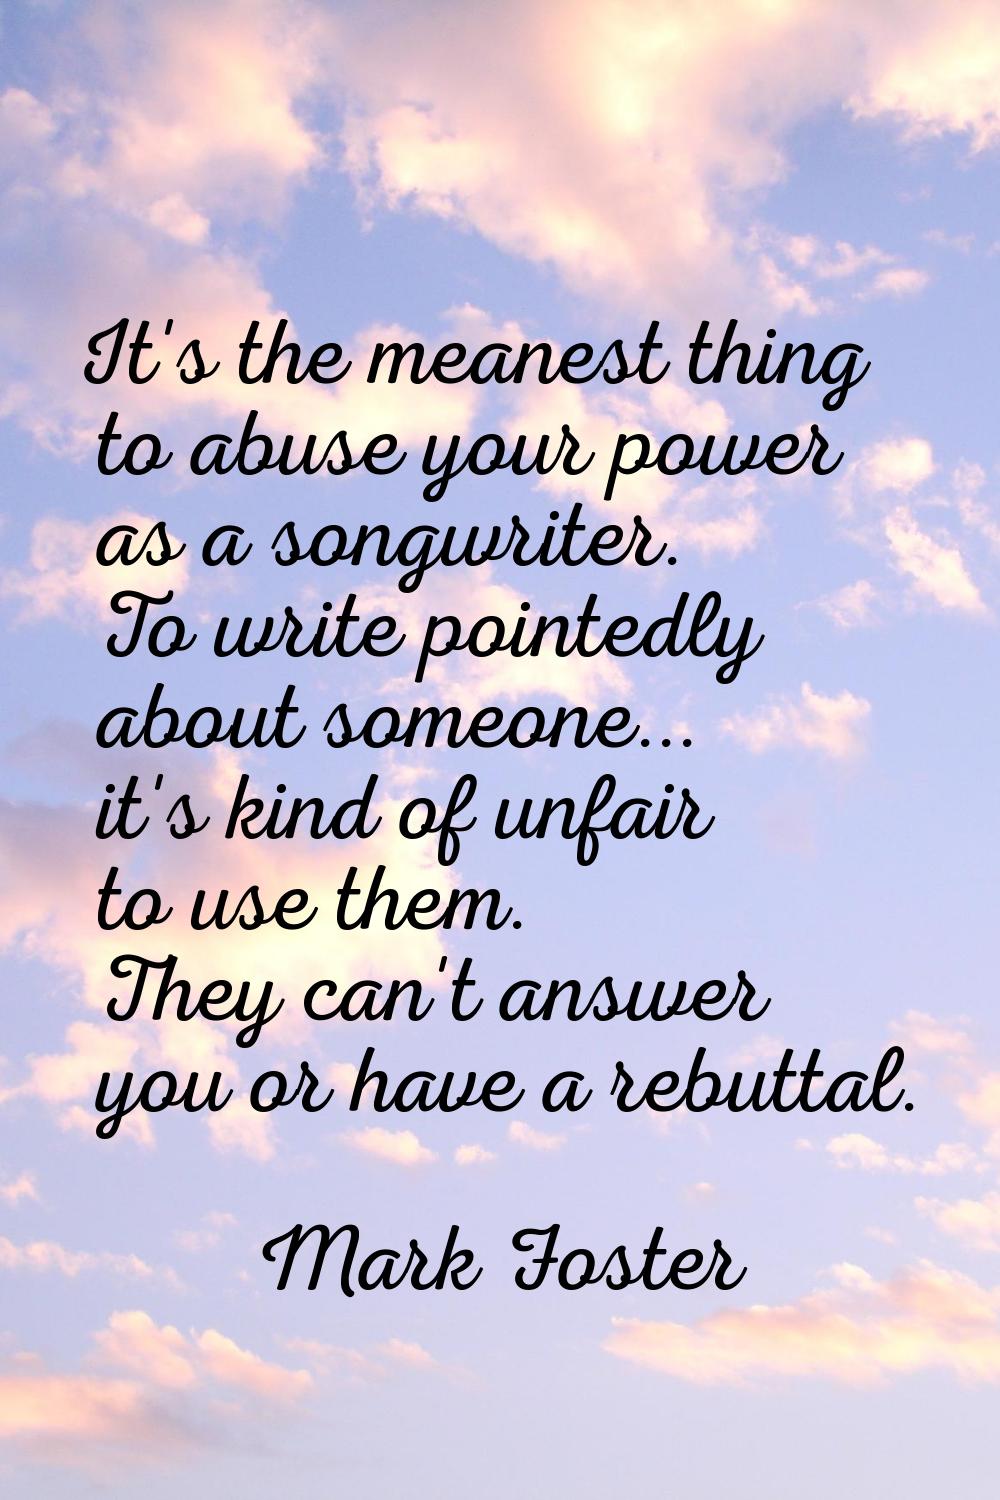 It's the meanest thing to abuse your power as a songwriter. To write pointedly about someone... it'